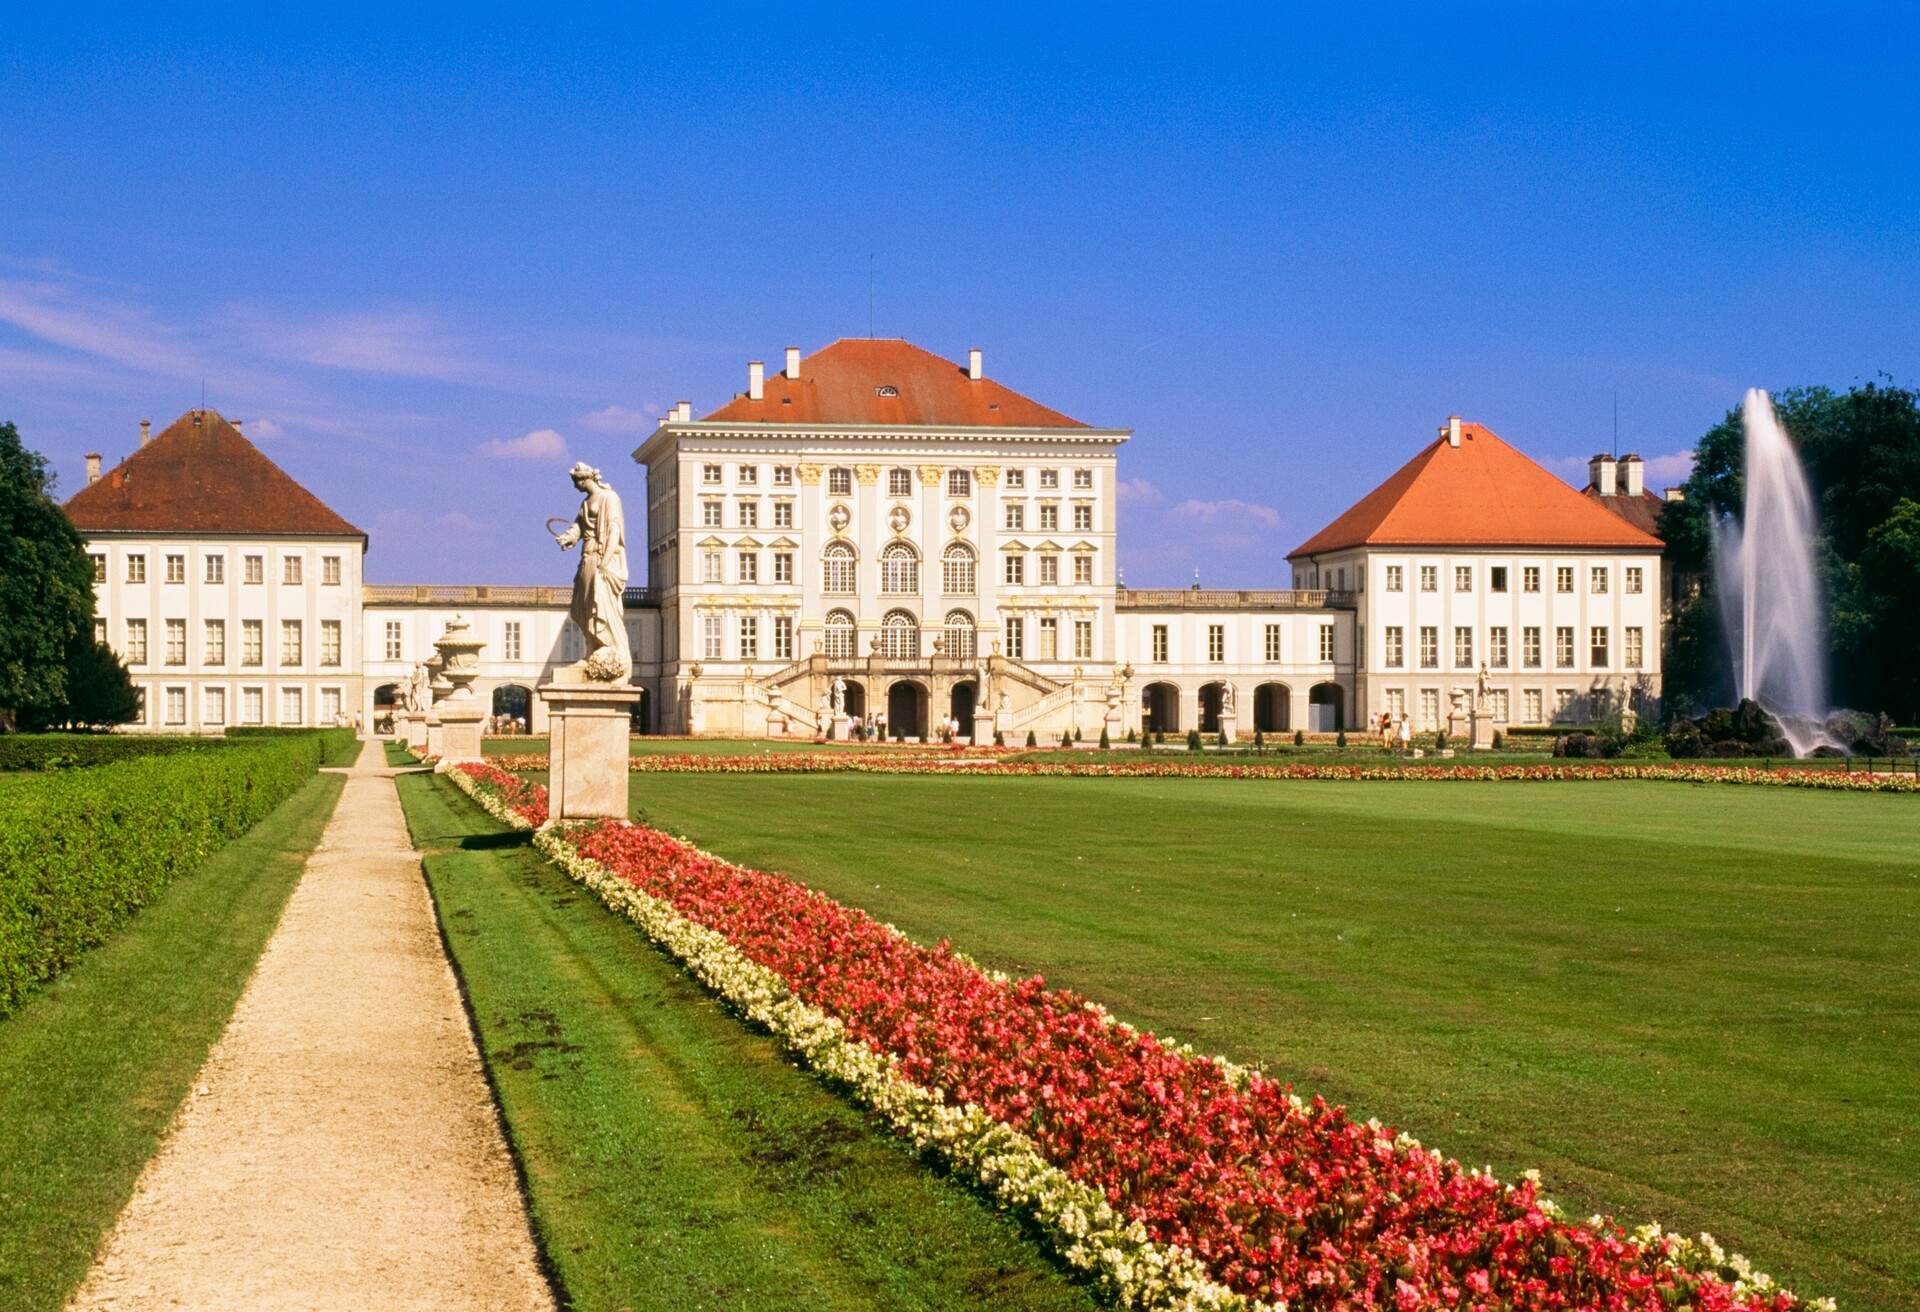 DEST_GERMANY_MUNICH_Nymphenburg Palace_GettyImages-87389531